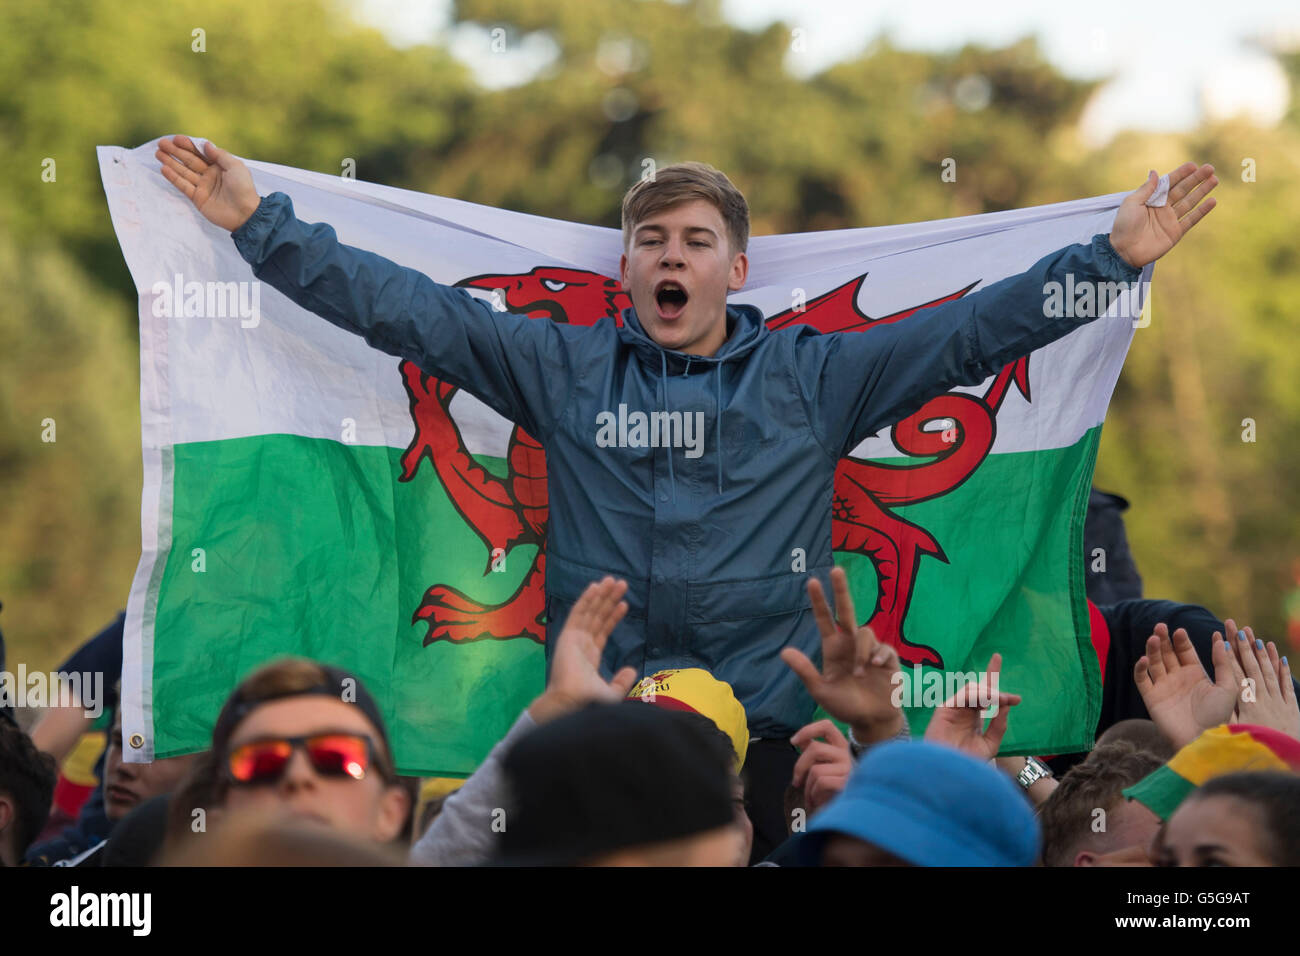 Wales football fans at the Wales supporters Fan Zone in Cooper's Field, Cardiff, for the Euro 2016 Wales v Russia game. Stock Photo